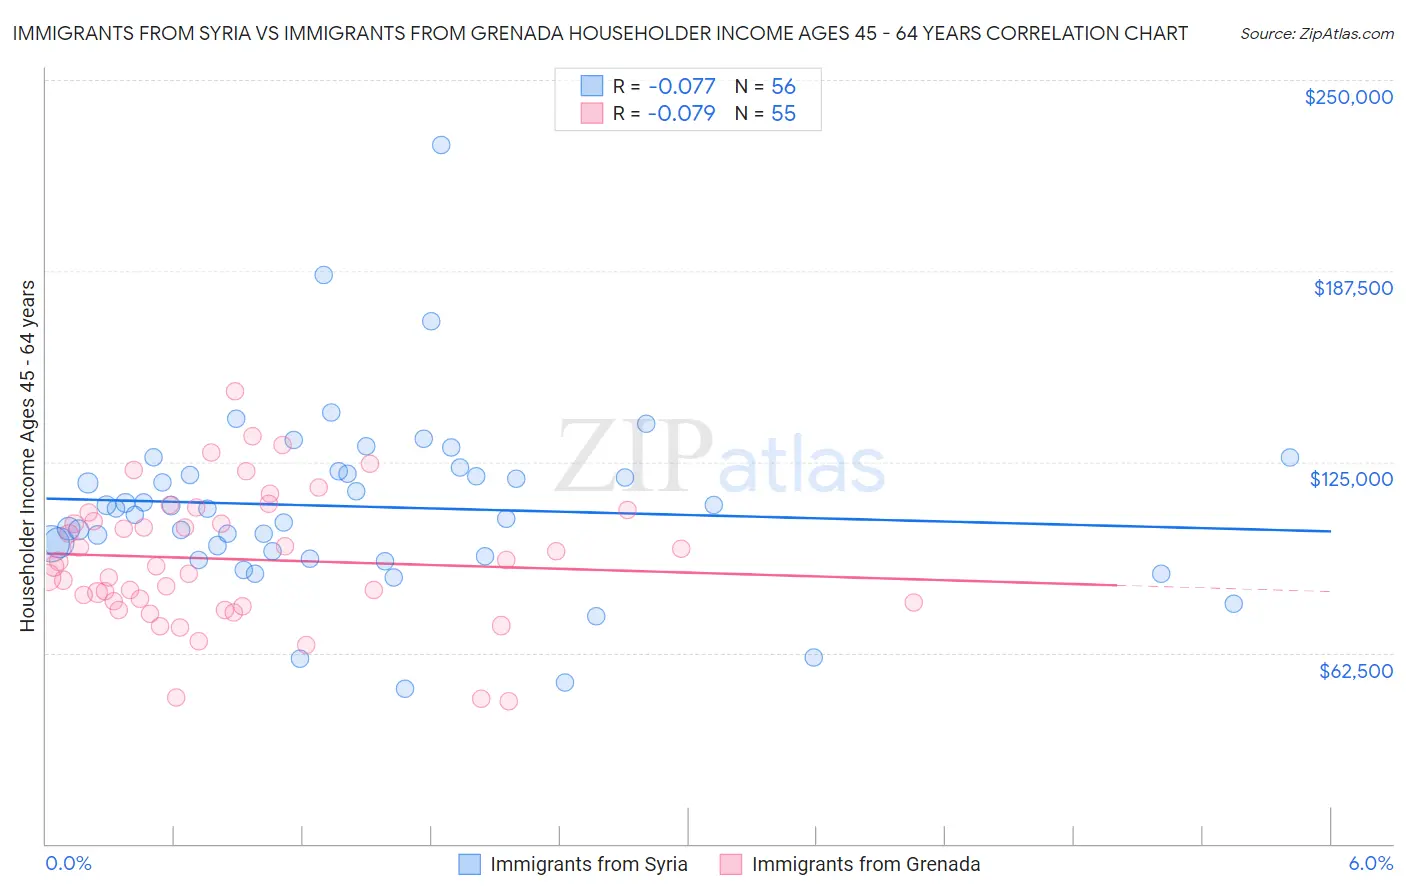 Immigrants from Syria vs Immigrants from Grenada Householder Income Ages 45 - 64 years